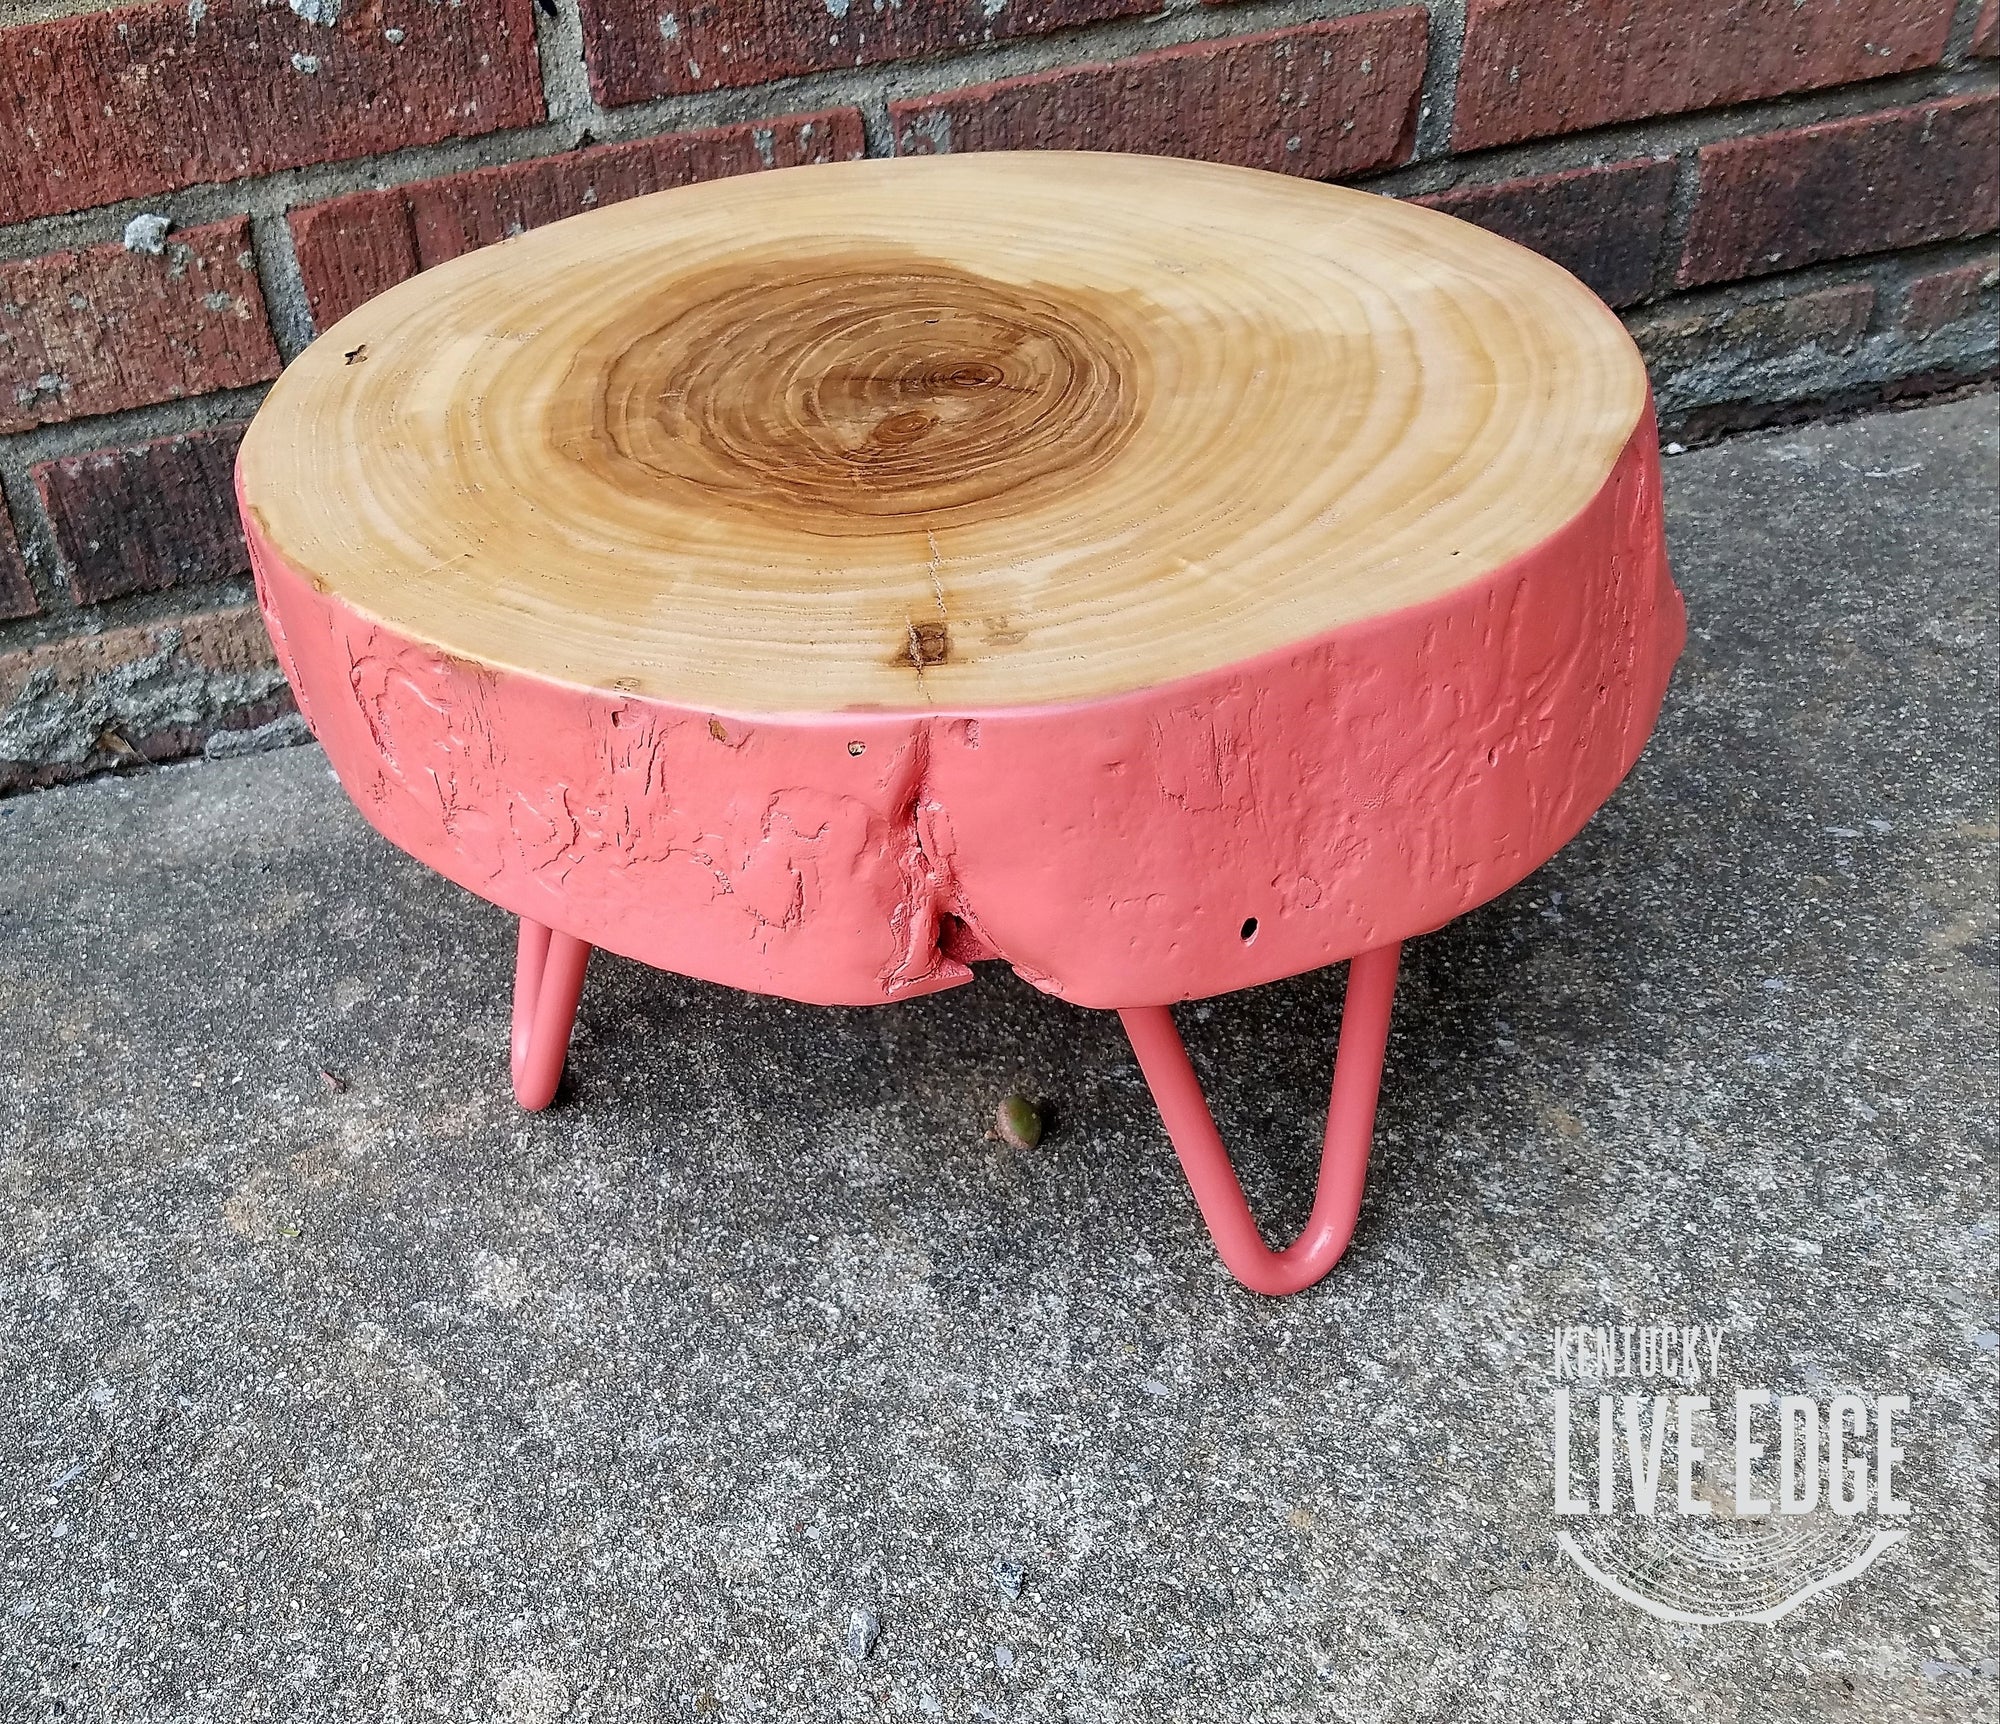 Plant Stand, Pink, Log, Side Table, Step Stool, Reclaimed Wood, Round, Organic, Natural Wood, Stool, Metal Legs, Live Edge, Mid Century